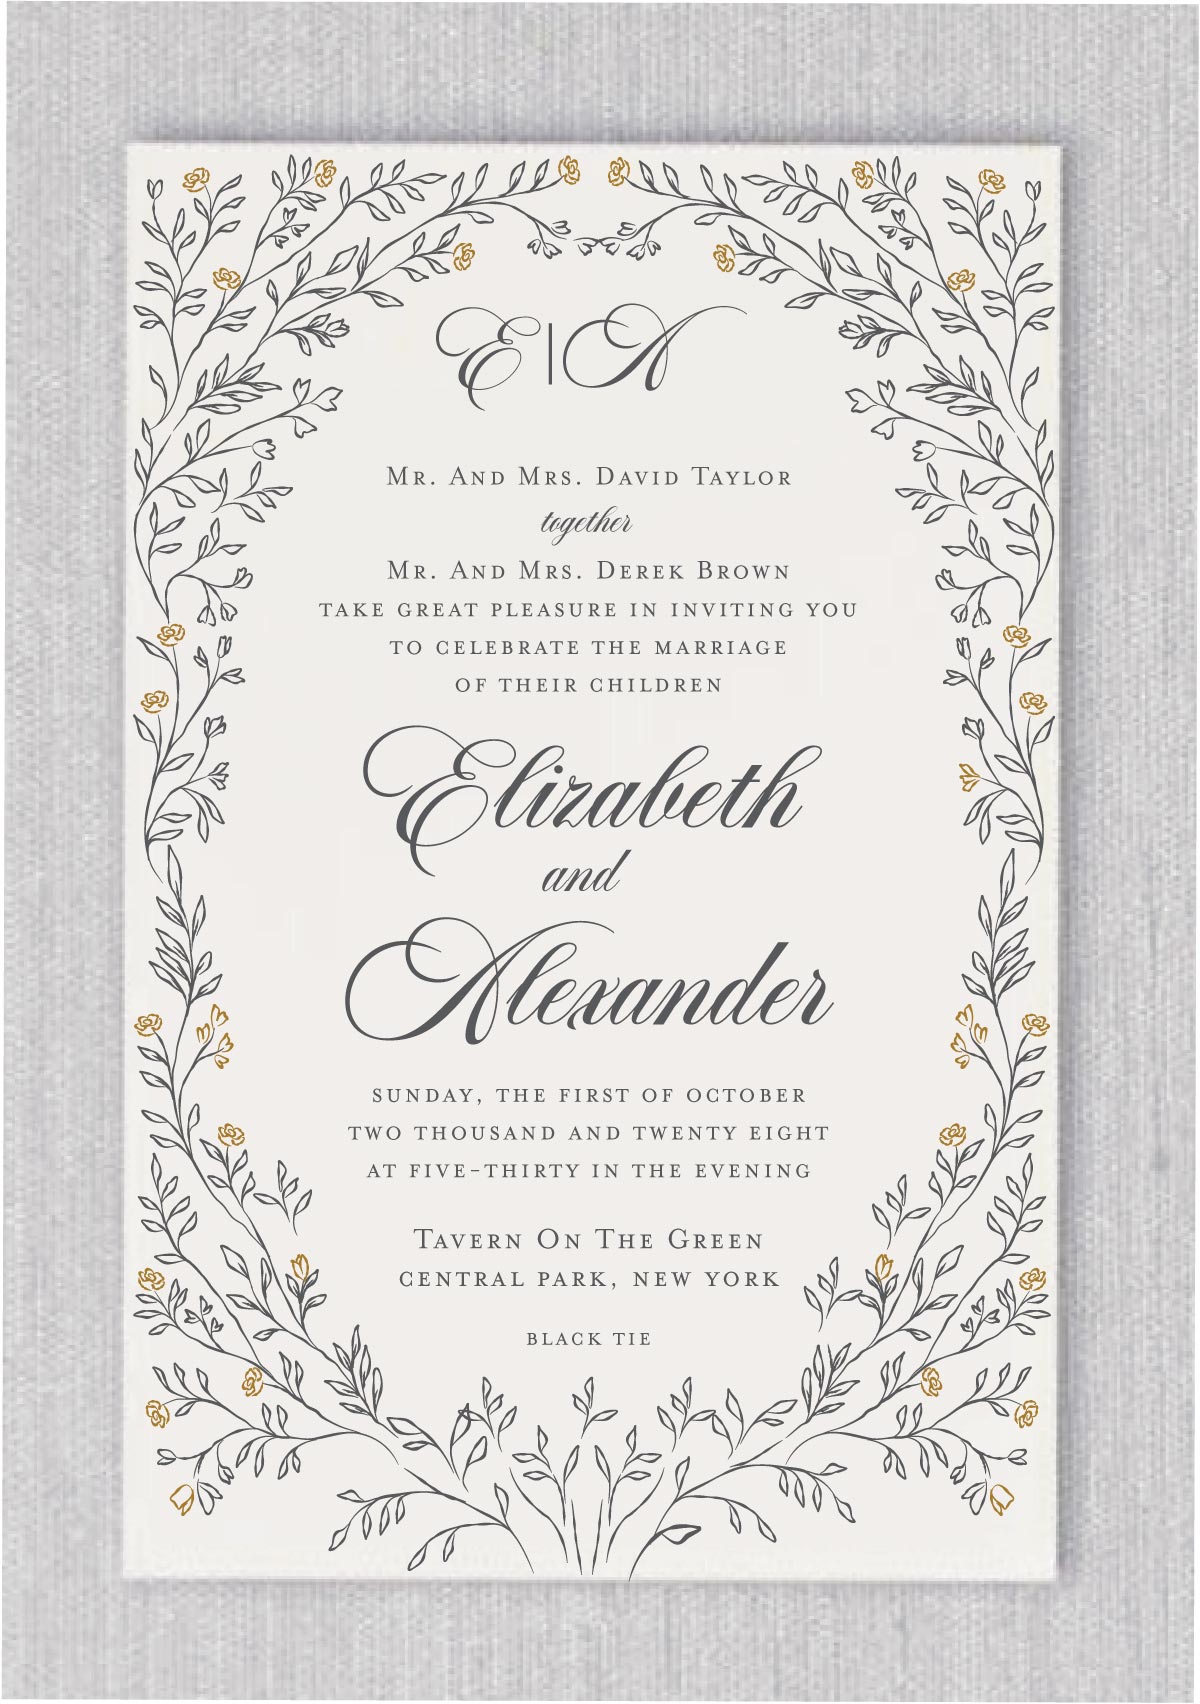 Golden Tree of Life - Wedding Invitations feature a simple but elegant golden tree of life surrounding your wedding details. Display your names in a fancy elegant type Guests will admire your elegant style.